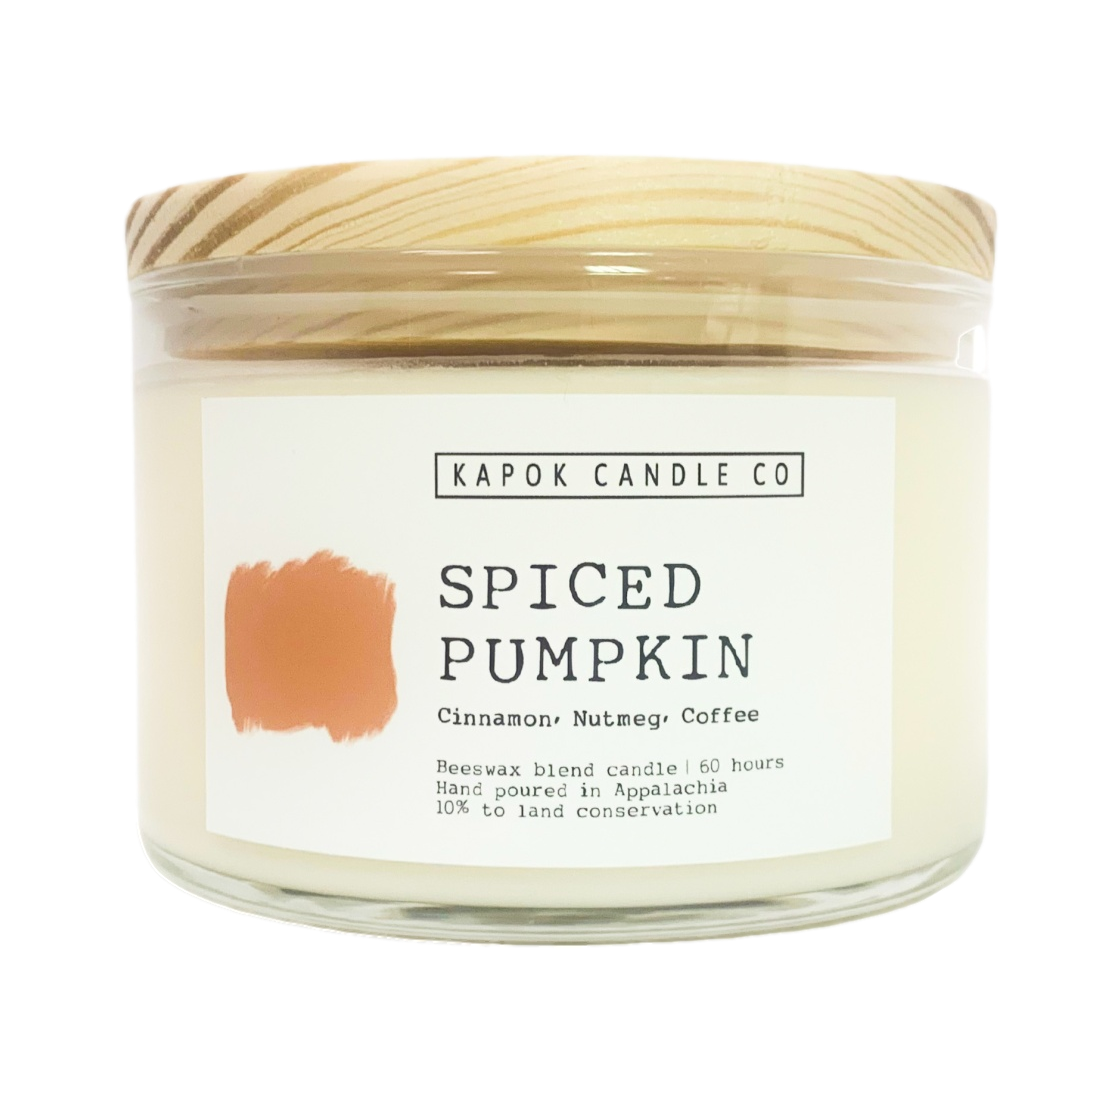 Spiced Pumpkin Beeswax Blend Candle, 21 Ounce Triple Wick